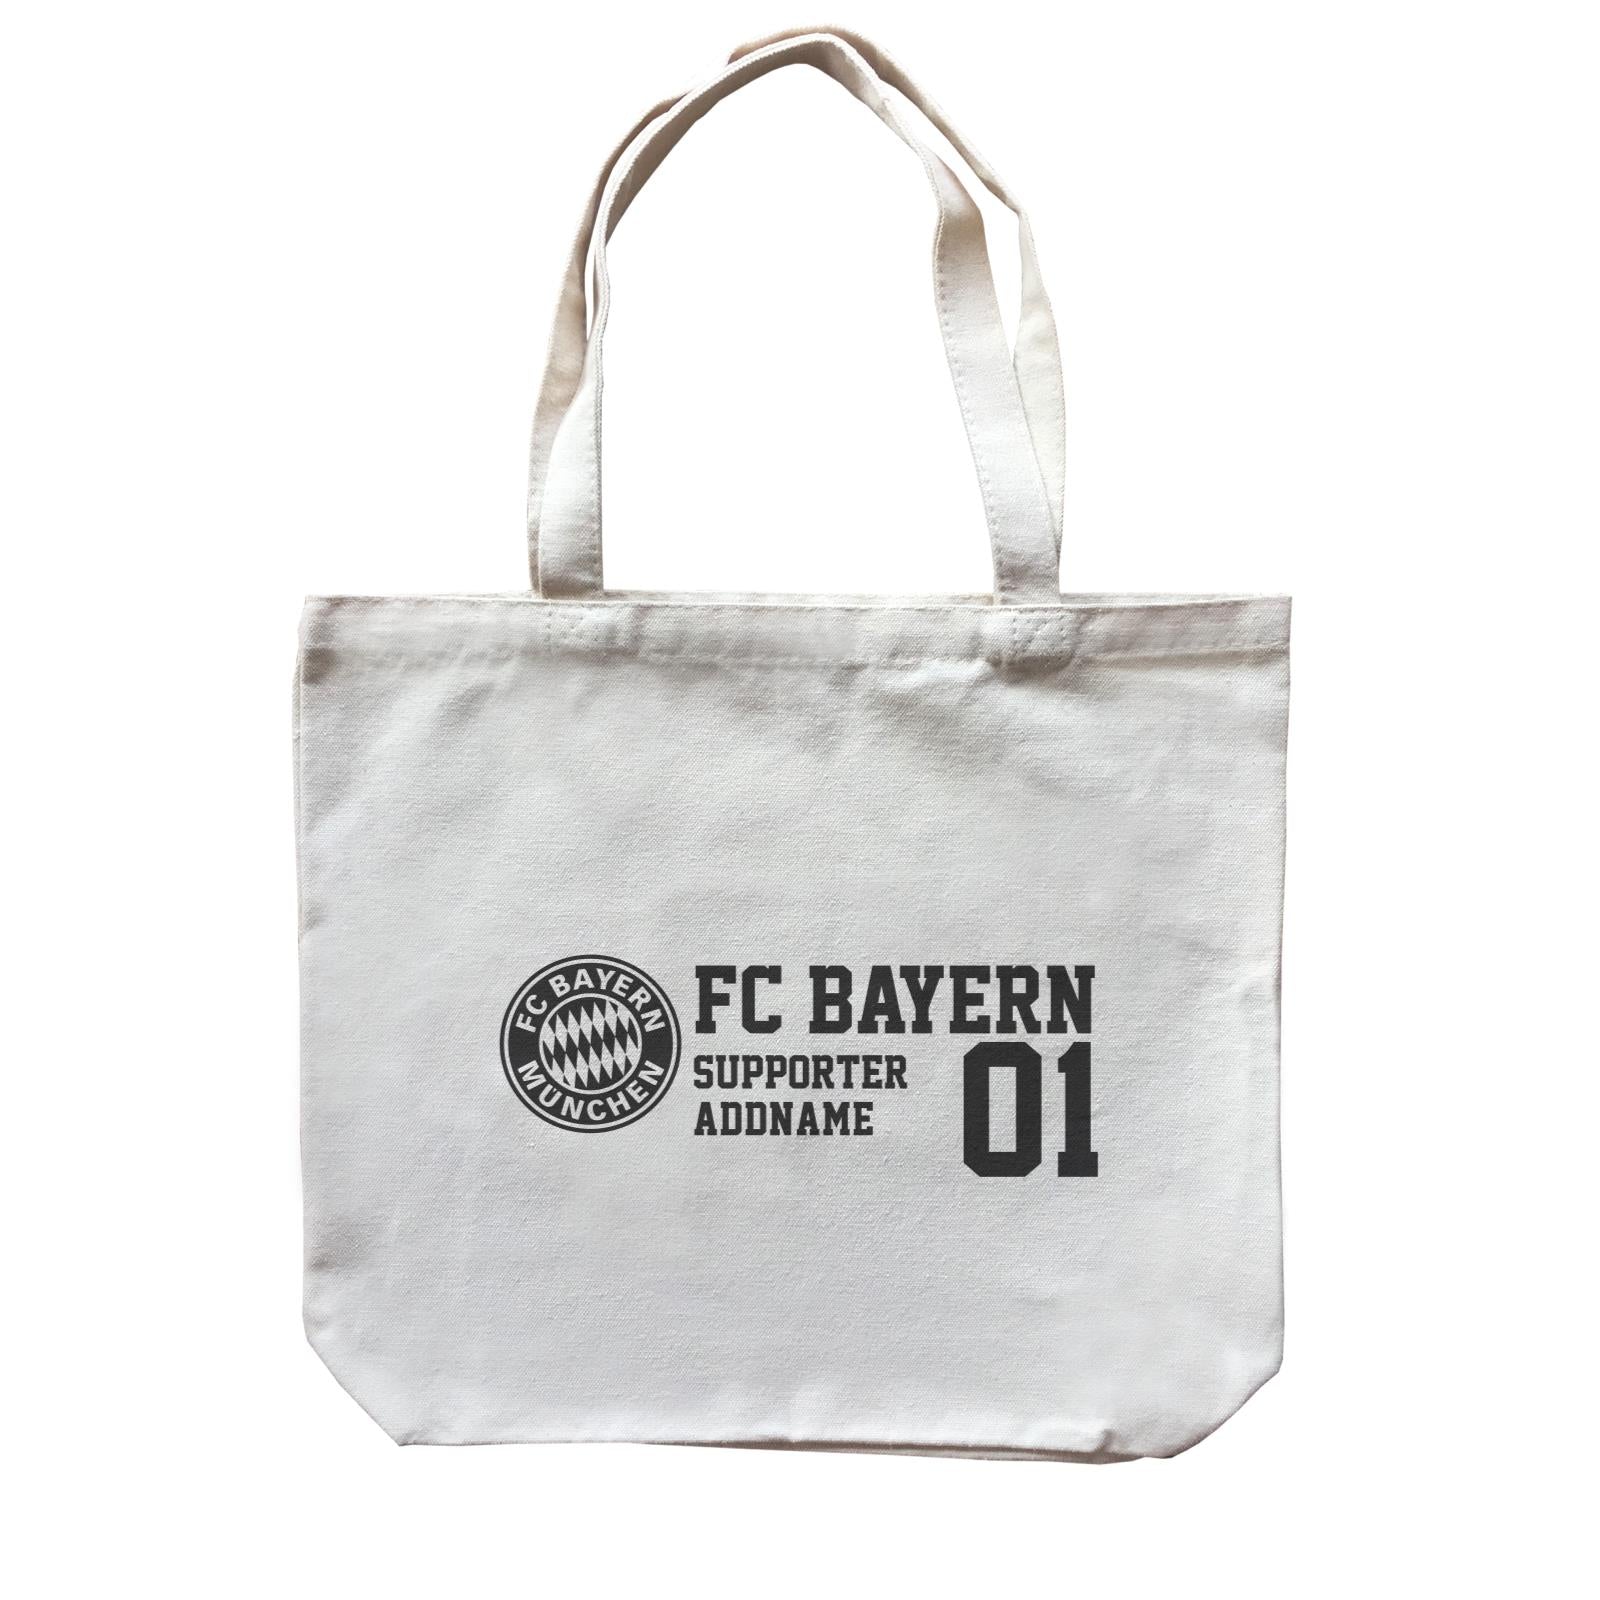 FC Bayern Football Supporter Accessories Addname Canvas Bag